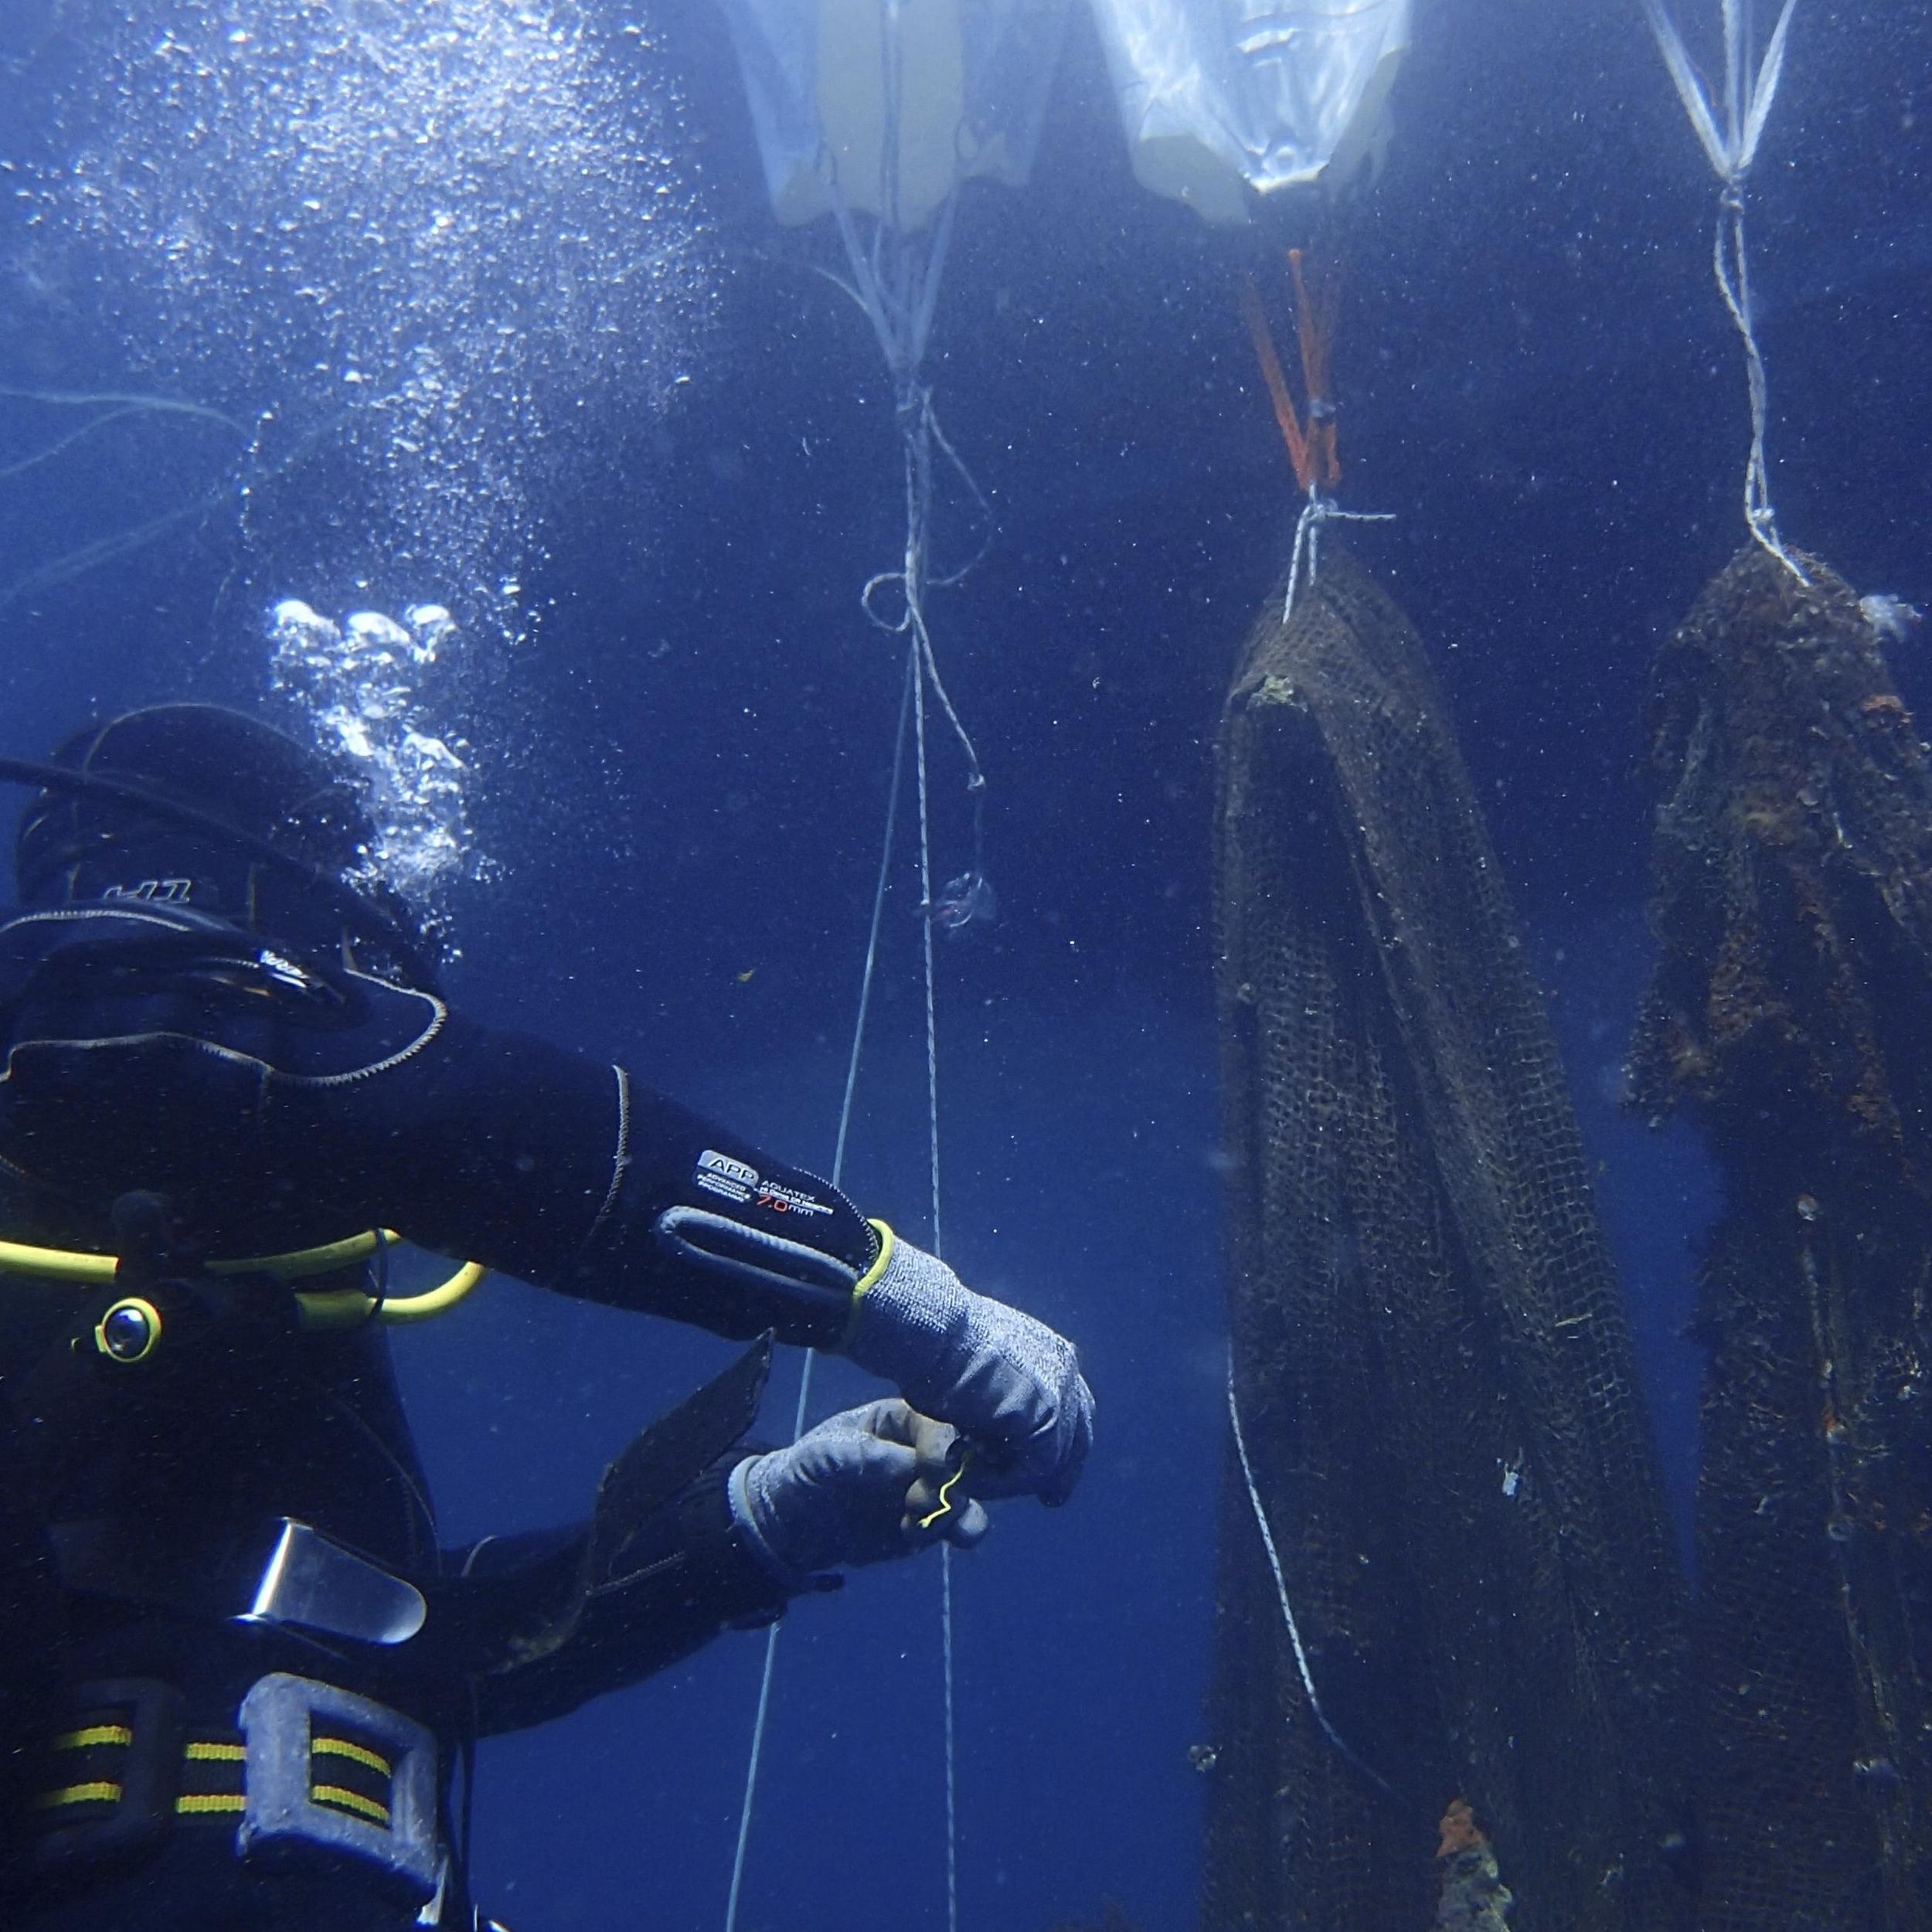 Abandoned, lost and discarded fishing gear 'ghost nets' are